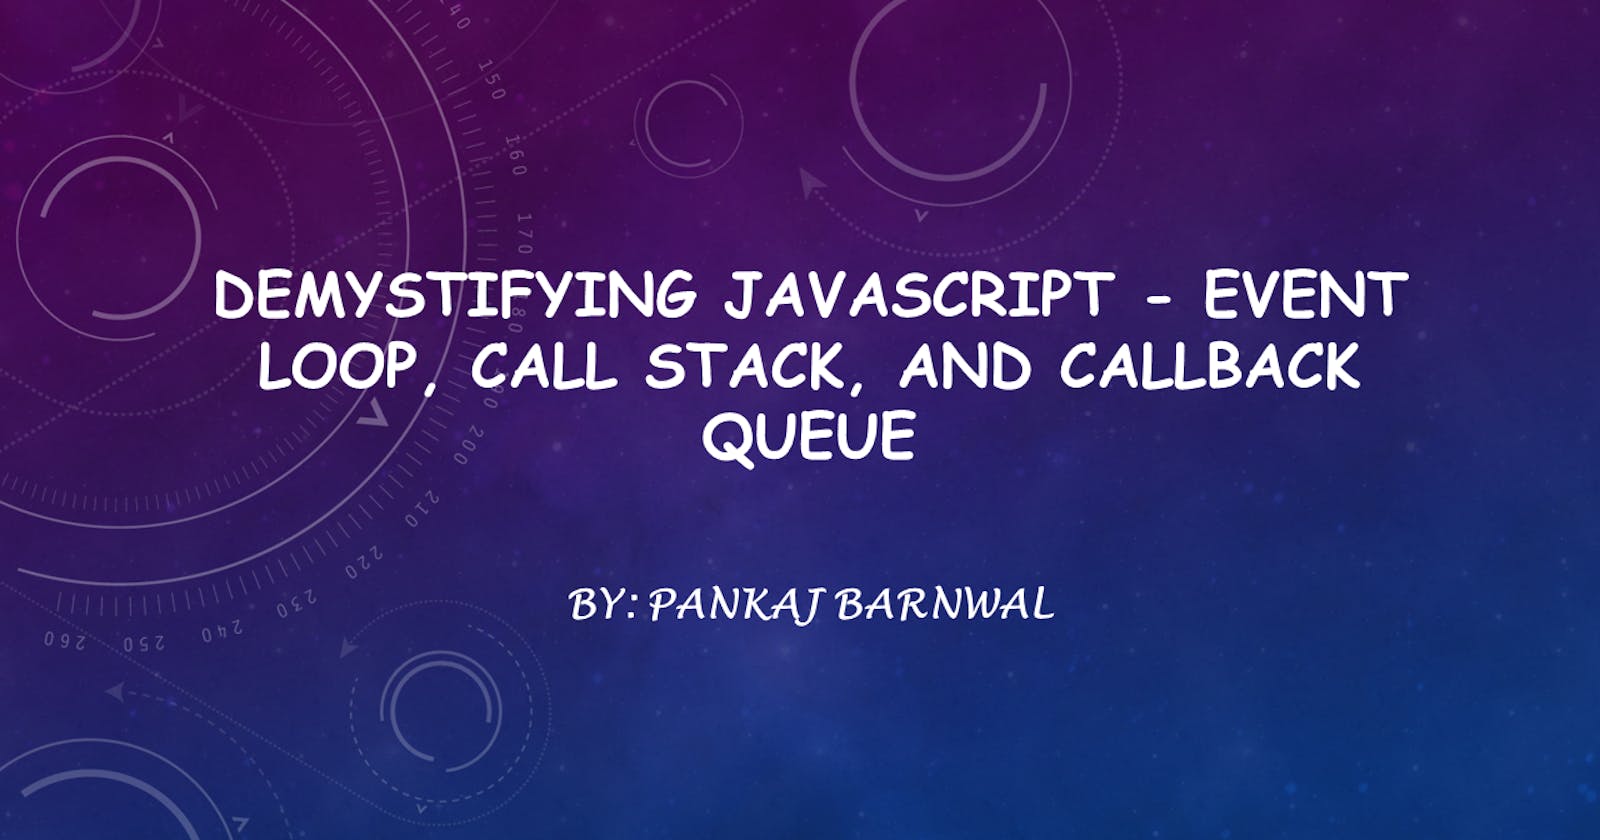 Demystifying Javascript - Event loop, call stack, and callback queue